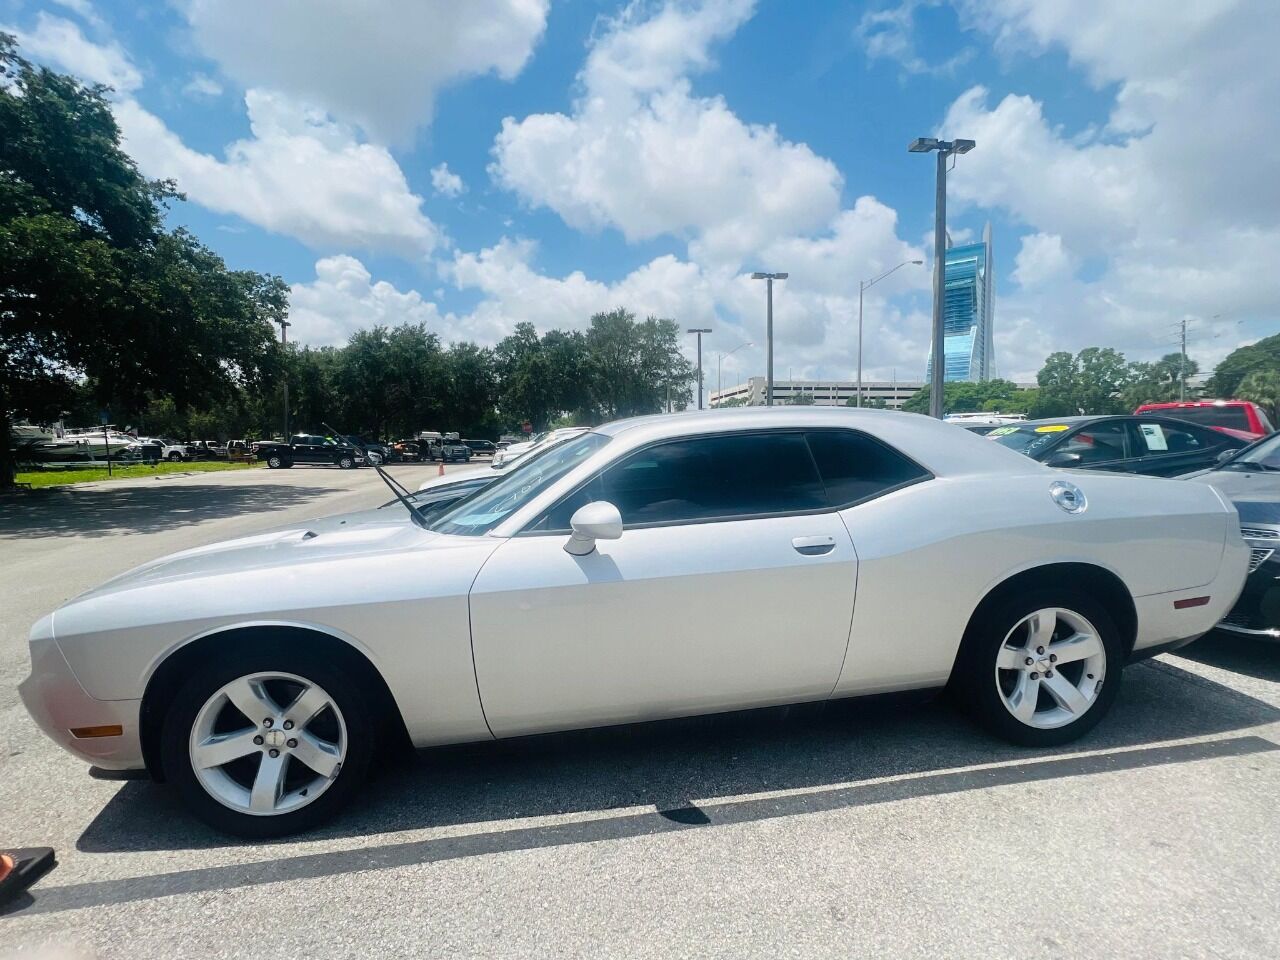 2012 DODGE Challenger Coupe - $10,950